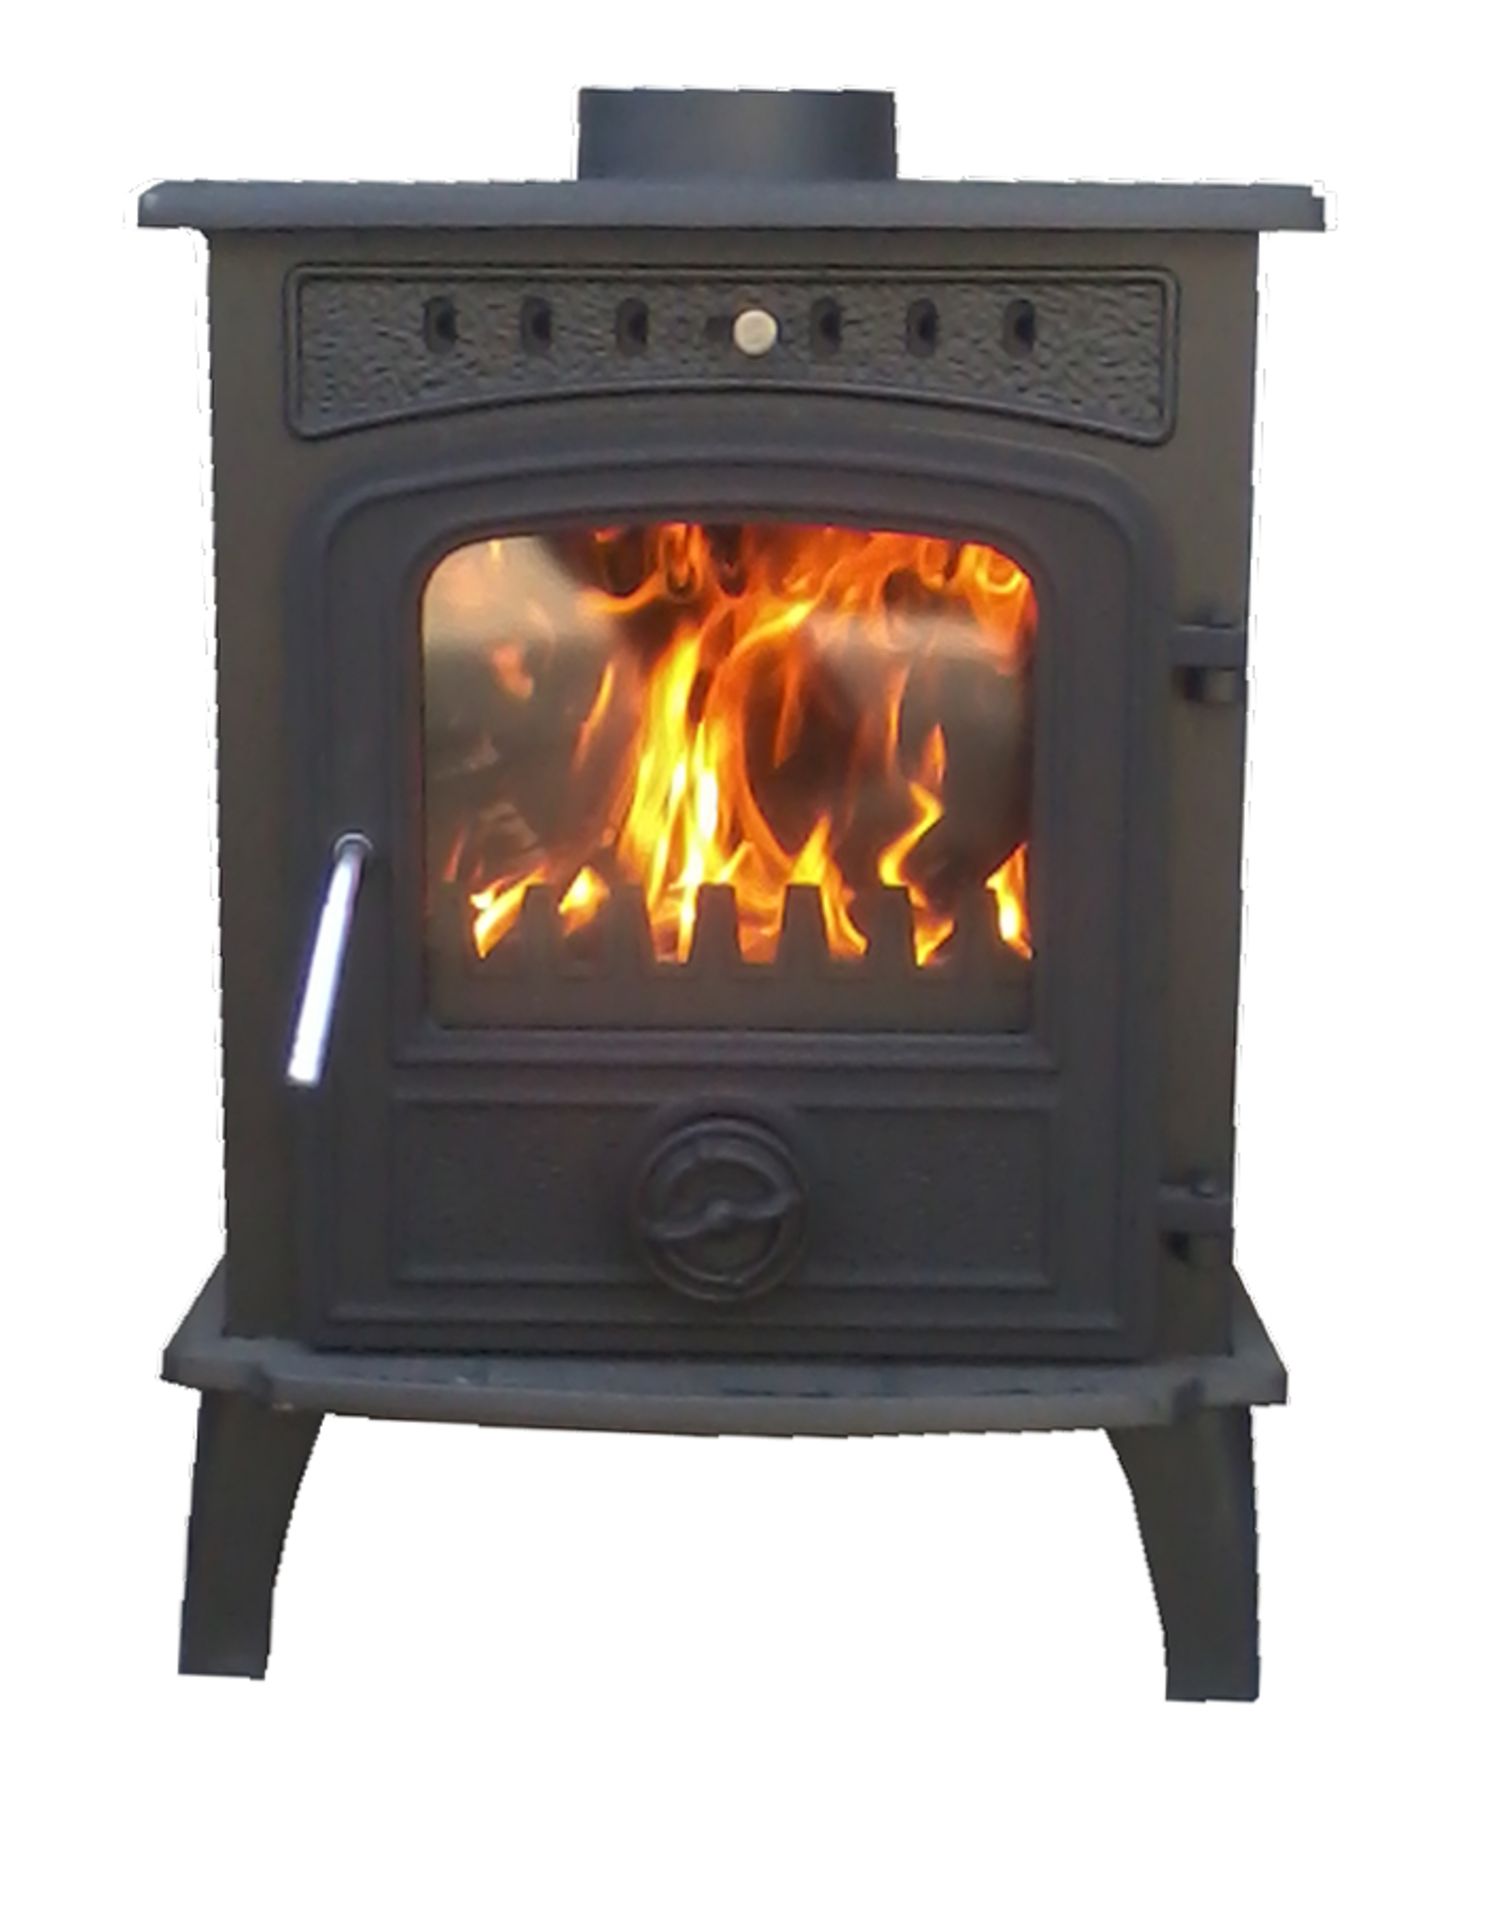 8KW BRAND NEW CRATED CAST IRON MULTI FUEL WOOD BURNING STOVE